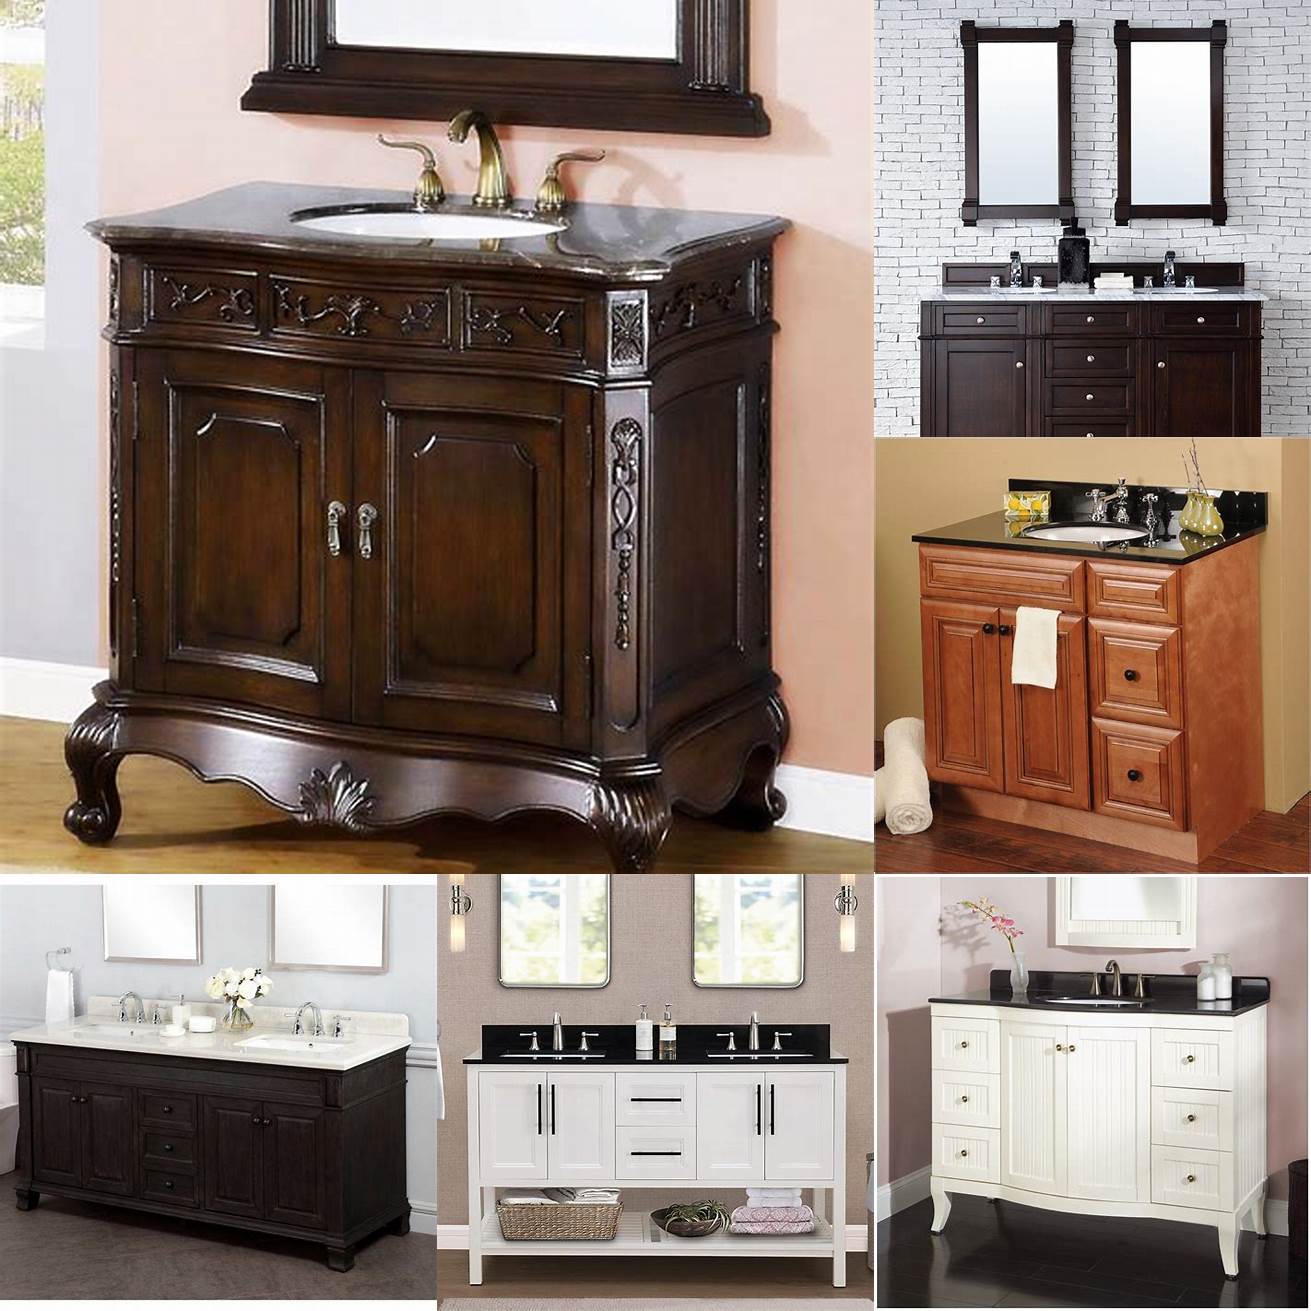 Photos of clearance vanities in different bathroom styles